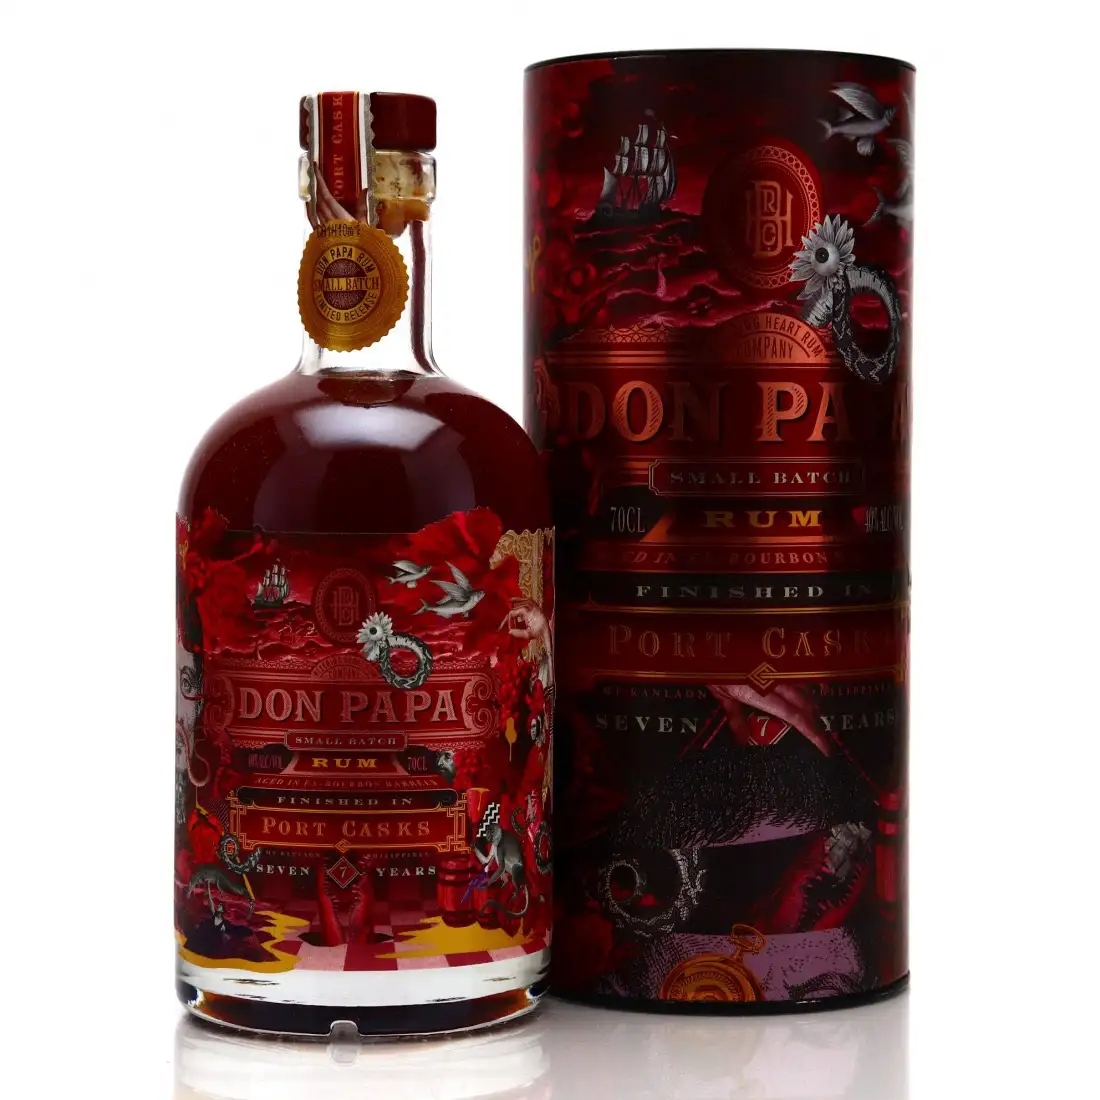 Image of the front of the bottle of the rum Don Papa Port Cask